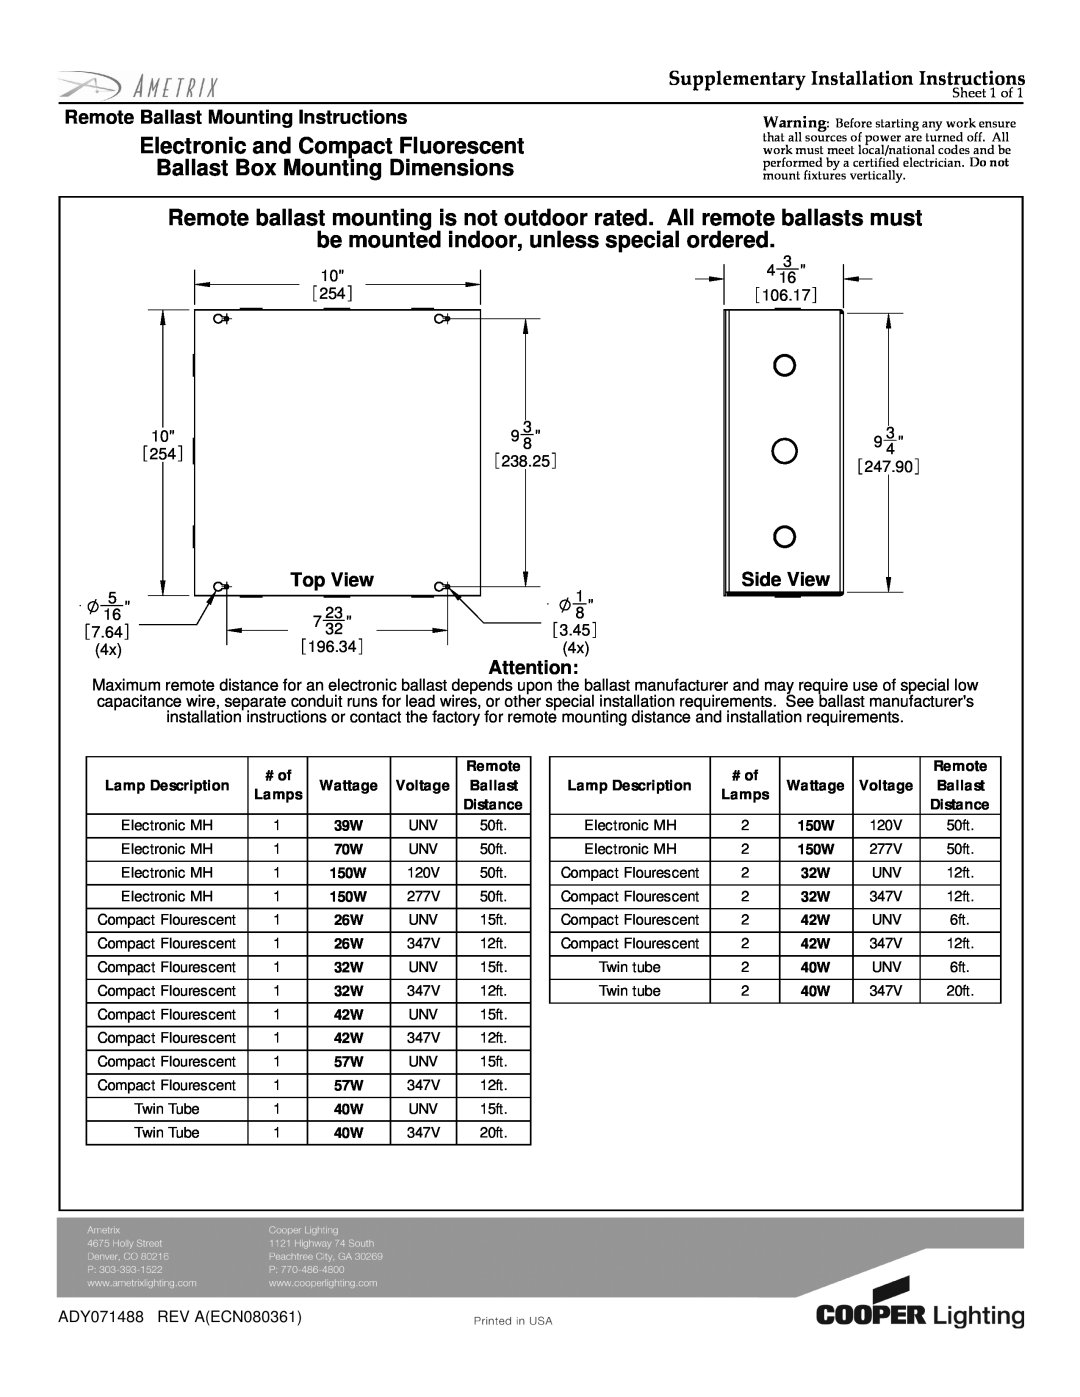 Cooper Lighting BSA2 installation instructions Electronic and Compact Fluorescent, Ballast Box Mounting Dimensions, 10 254 